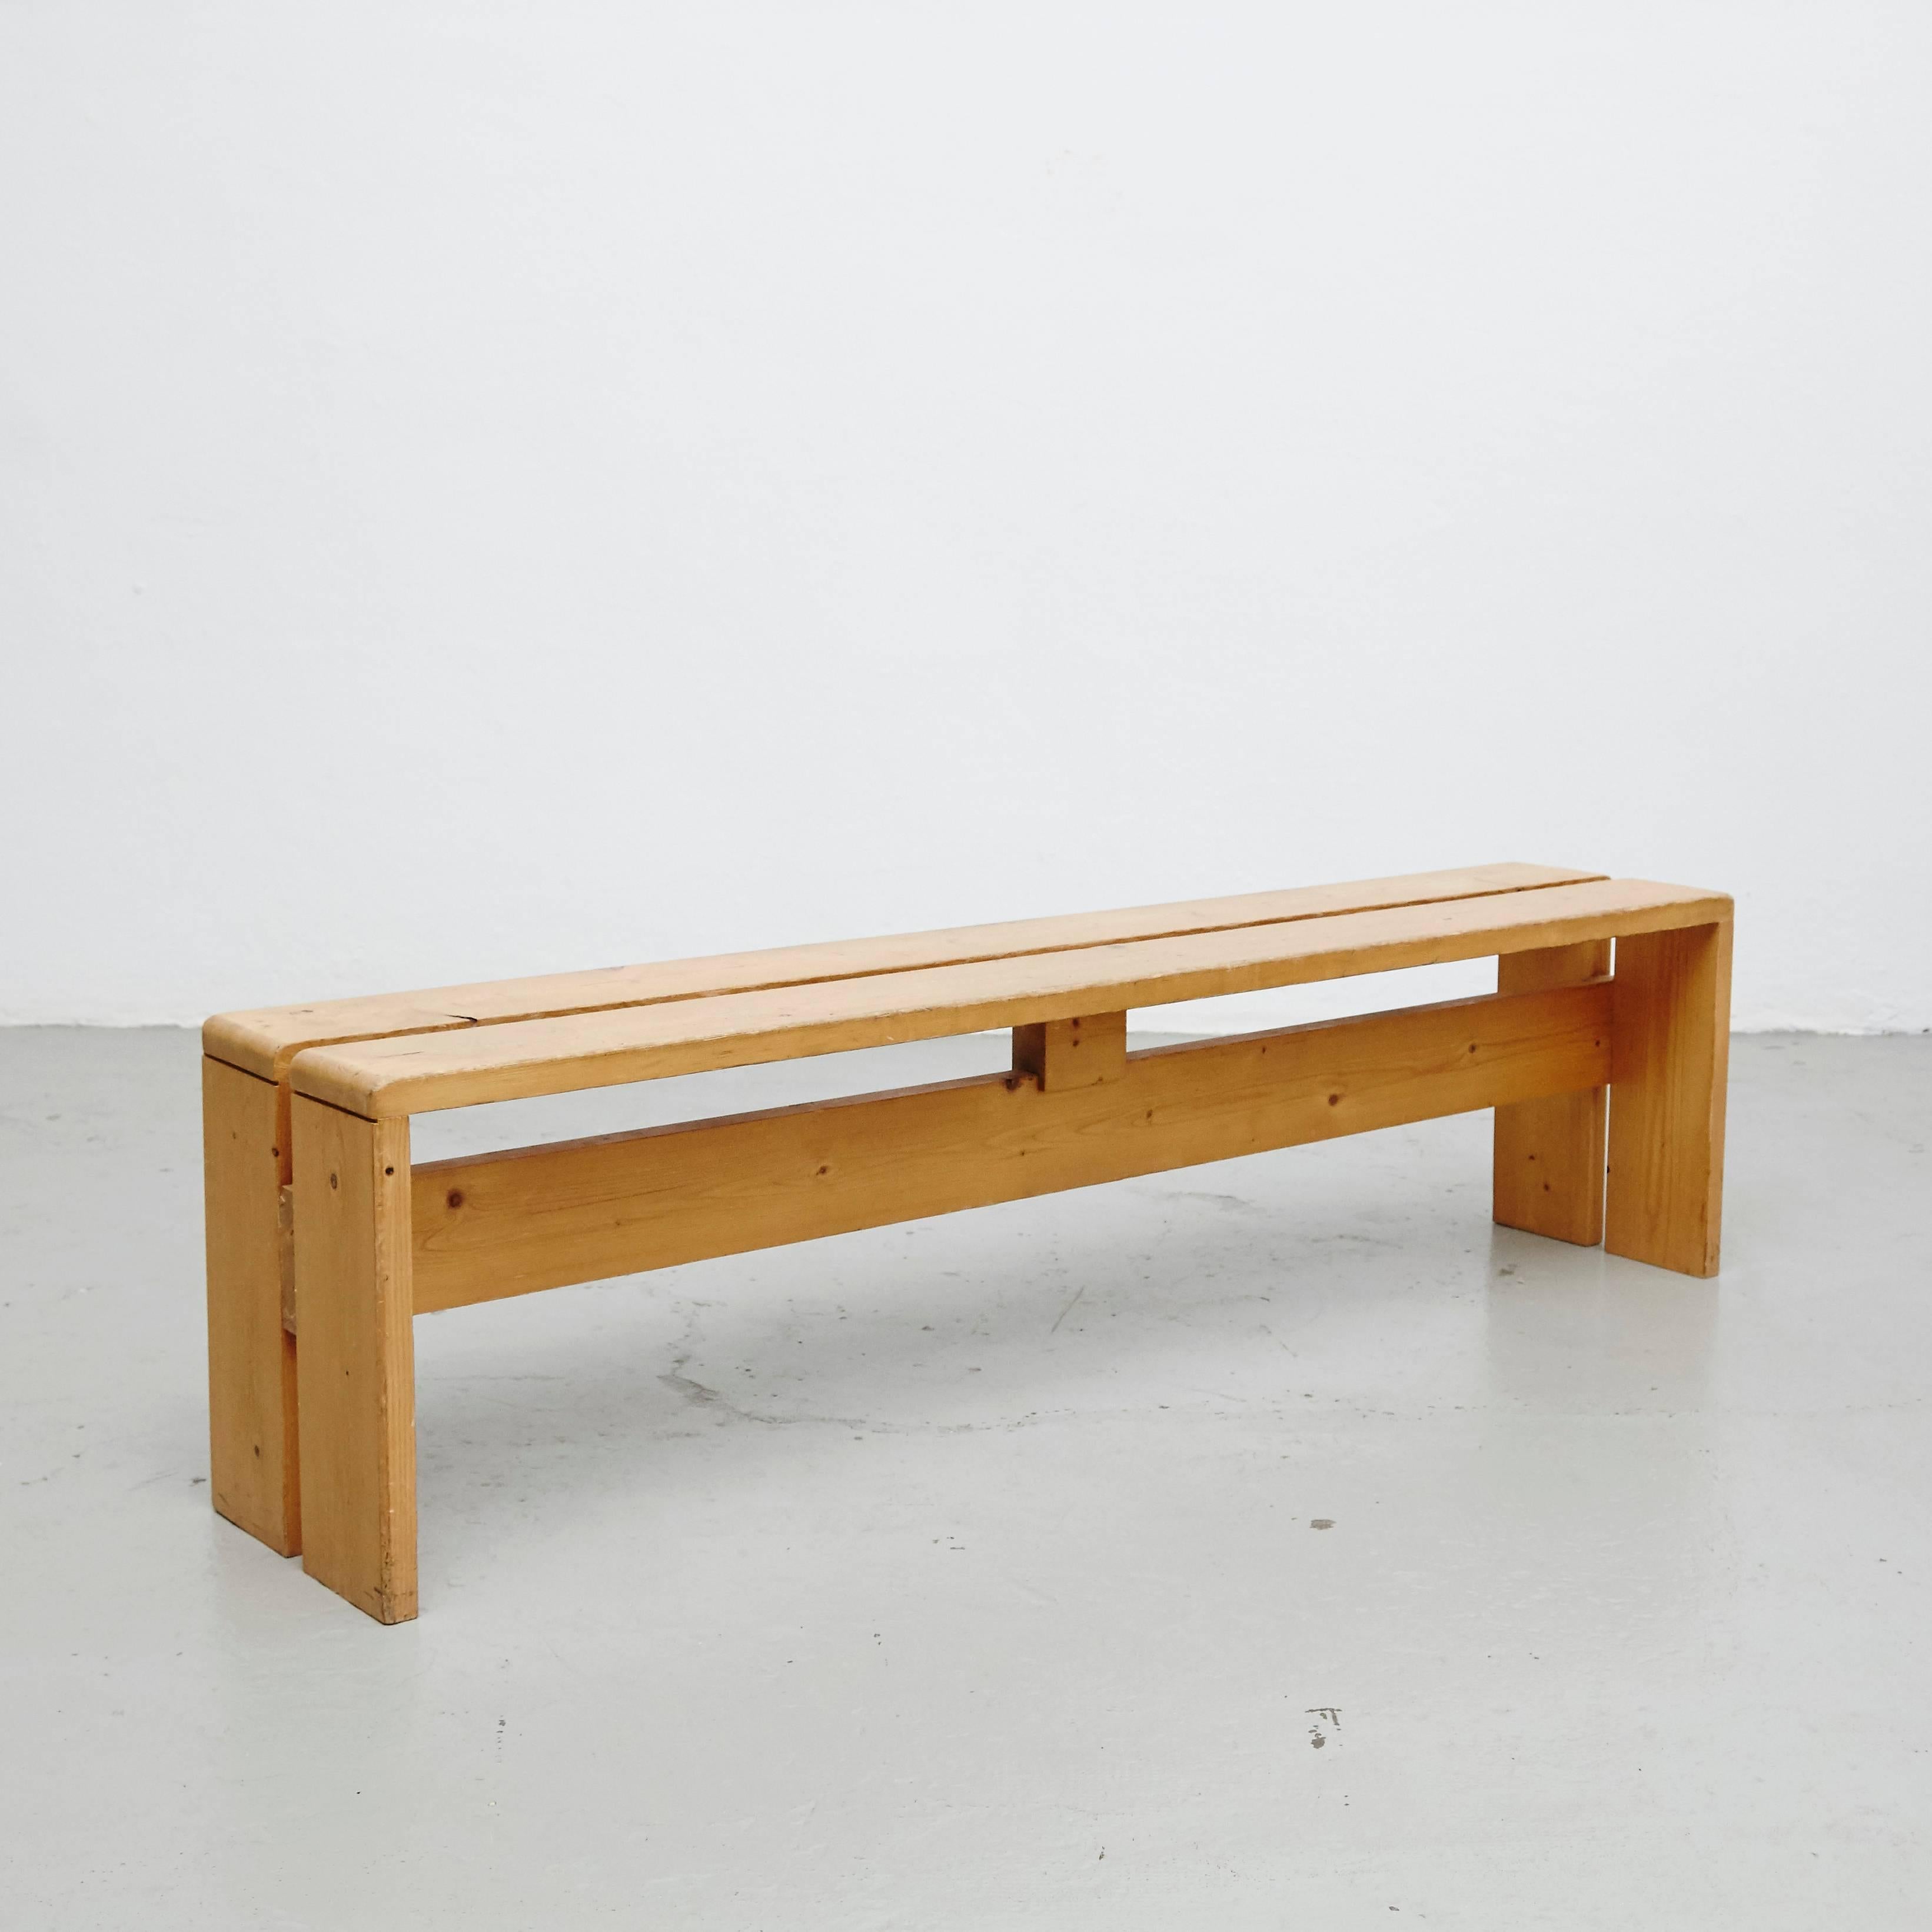 Bench designed by Charlotte Perriand for Les Arcs ski resort circa 1960, manufactured in France.
Pinewood.

In good original condition, with minor wear consistent with age and use, preserving a beautiful patina.

Charlotte Perriand (1903 -